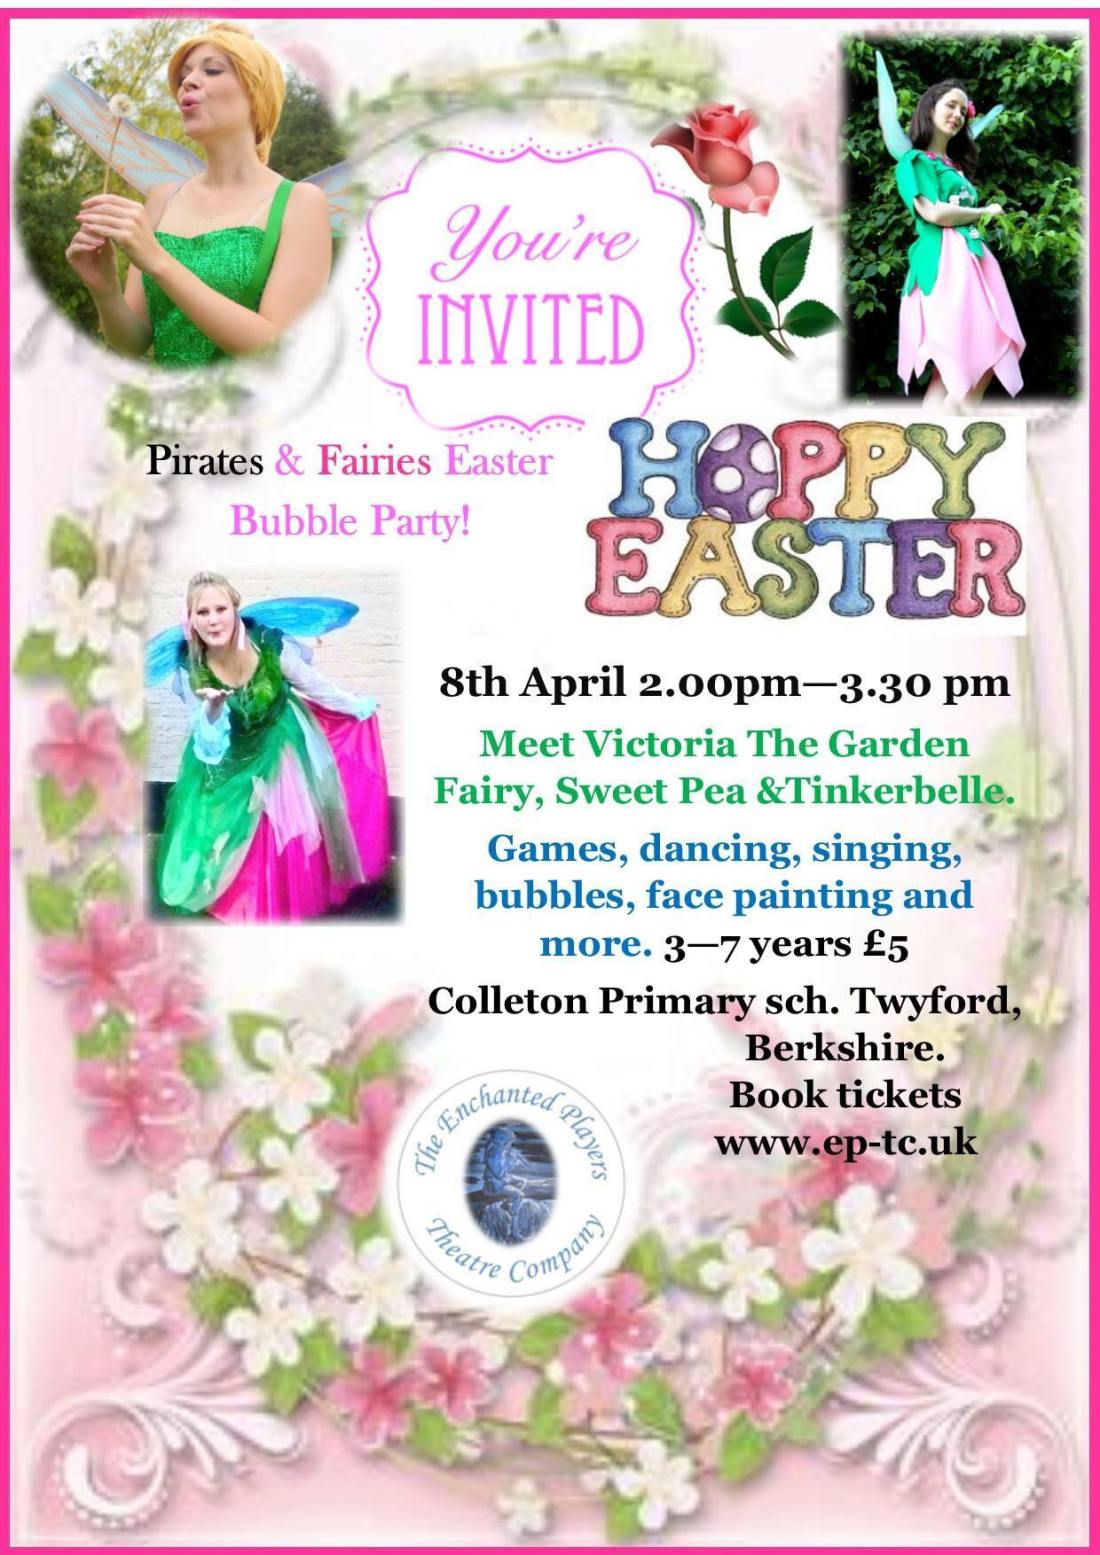 Pirates and Fairies Easter Bubble Party